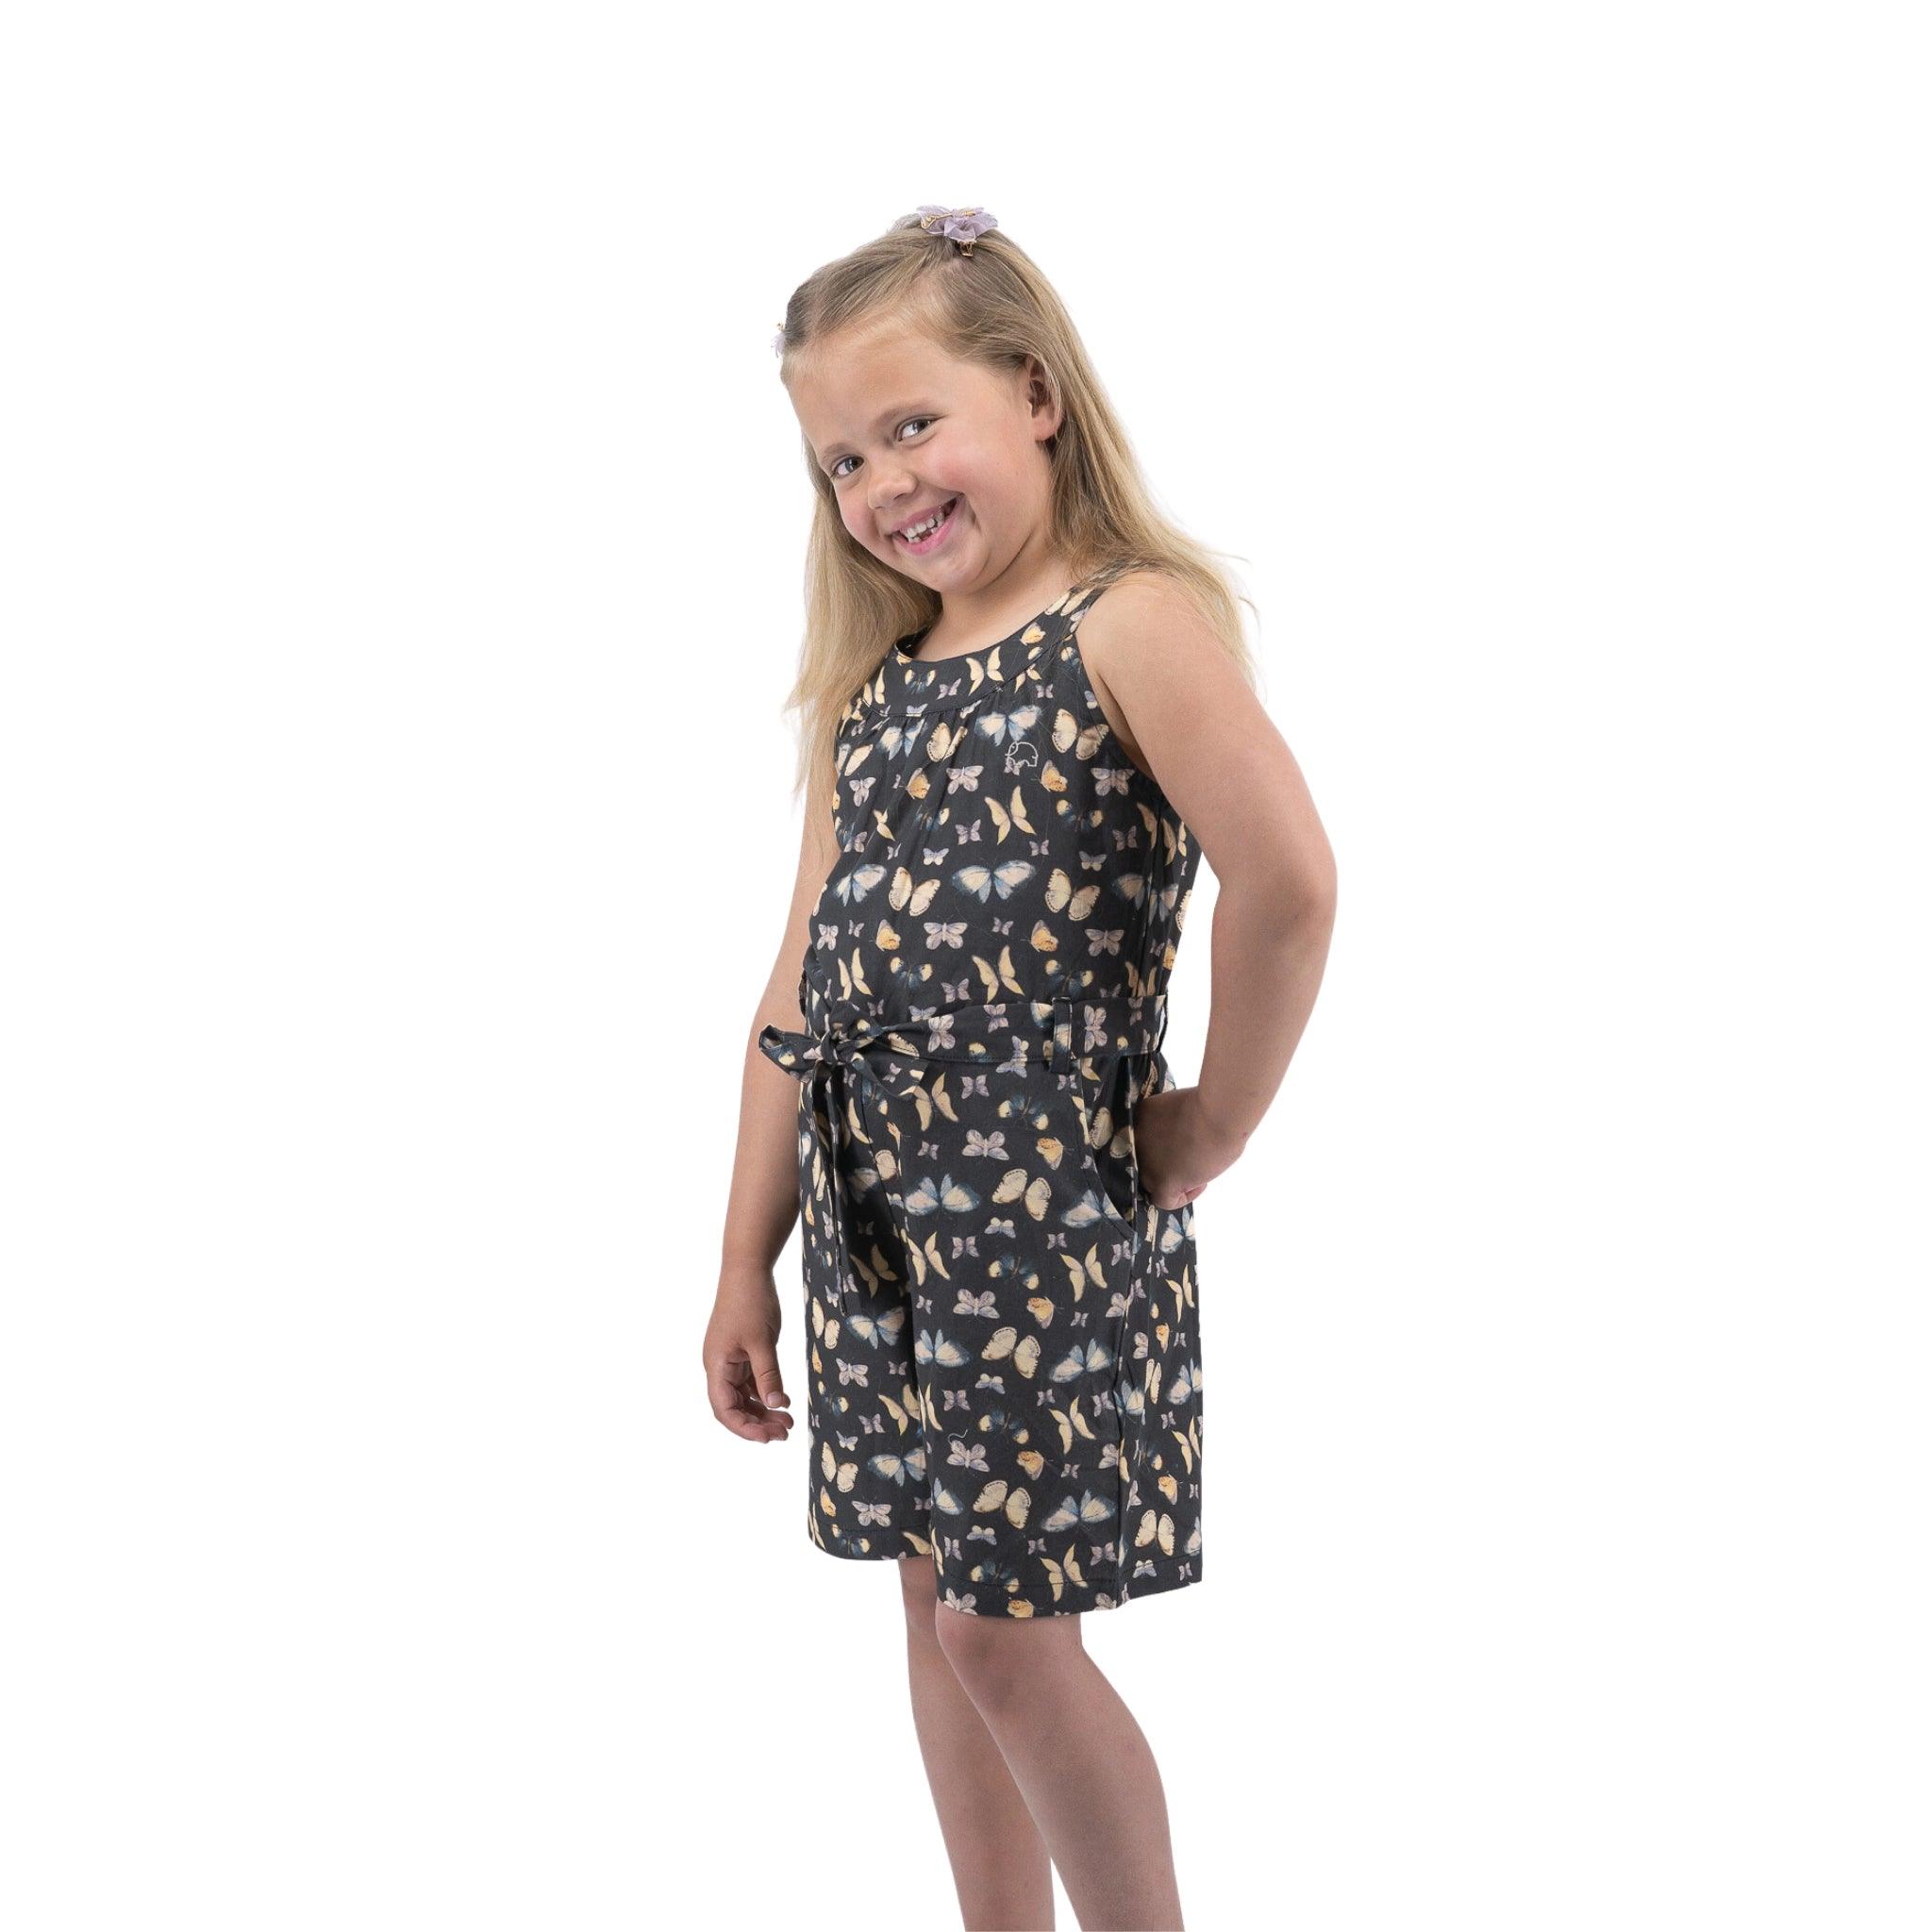 A young girl smiling at the camera, wearing a sleeveless floral dress, standing against a white background.